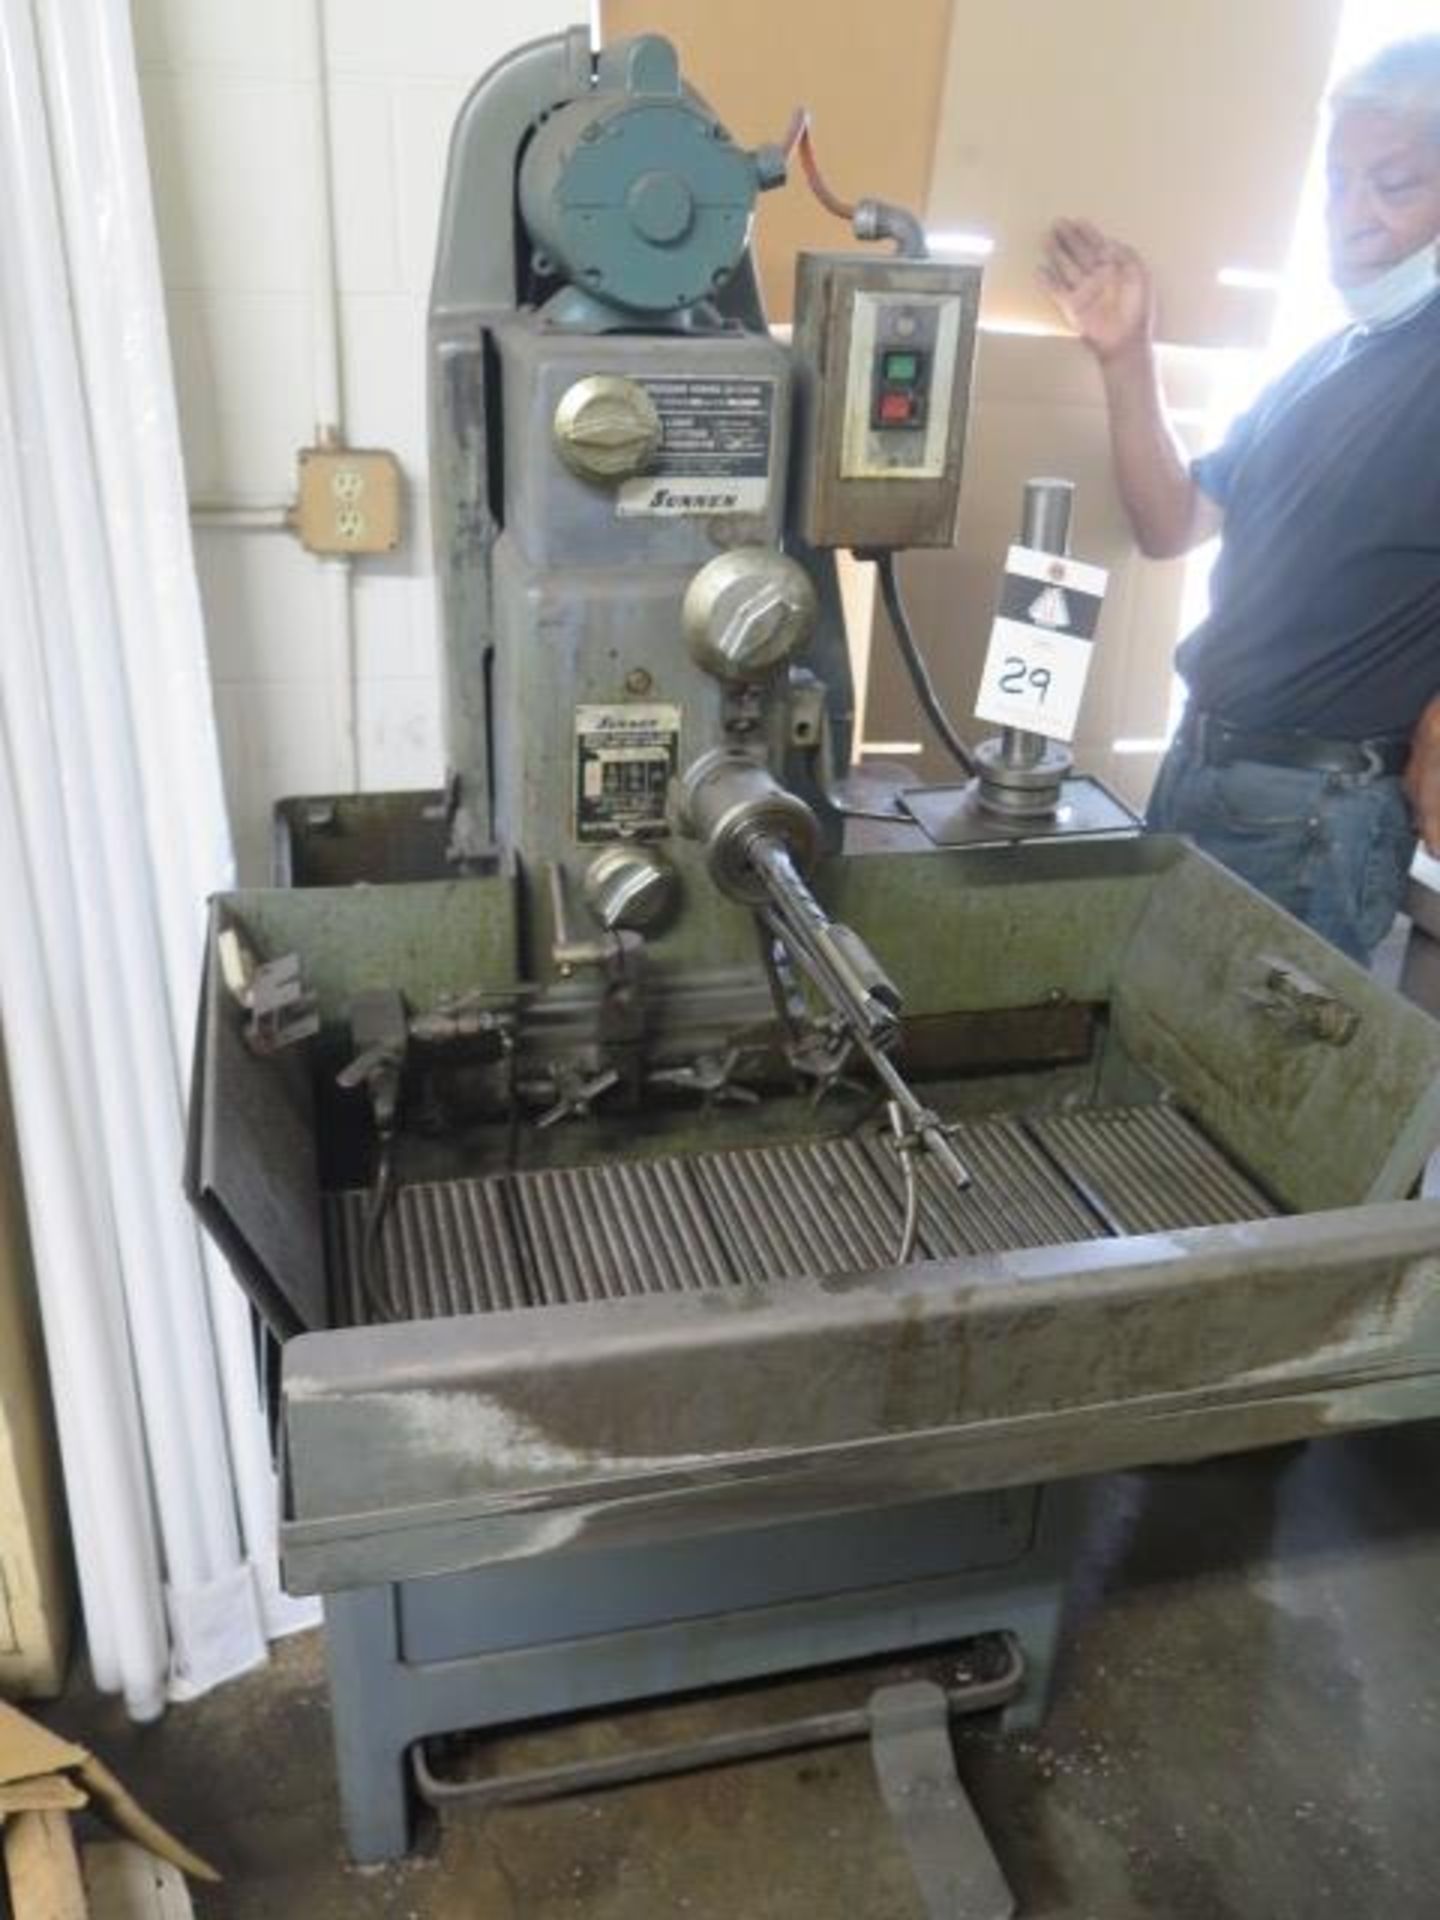 Sunnen MGG-1650 Precision Honing Machine s/n 50631 w/ 12-Speeds, Coolant (SOLD AS-IS - NO WARRANTY) - Image 2 of 6